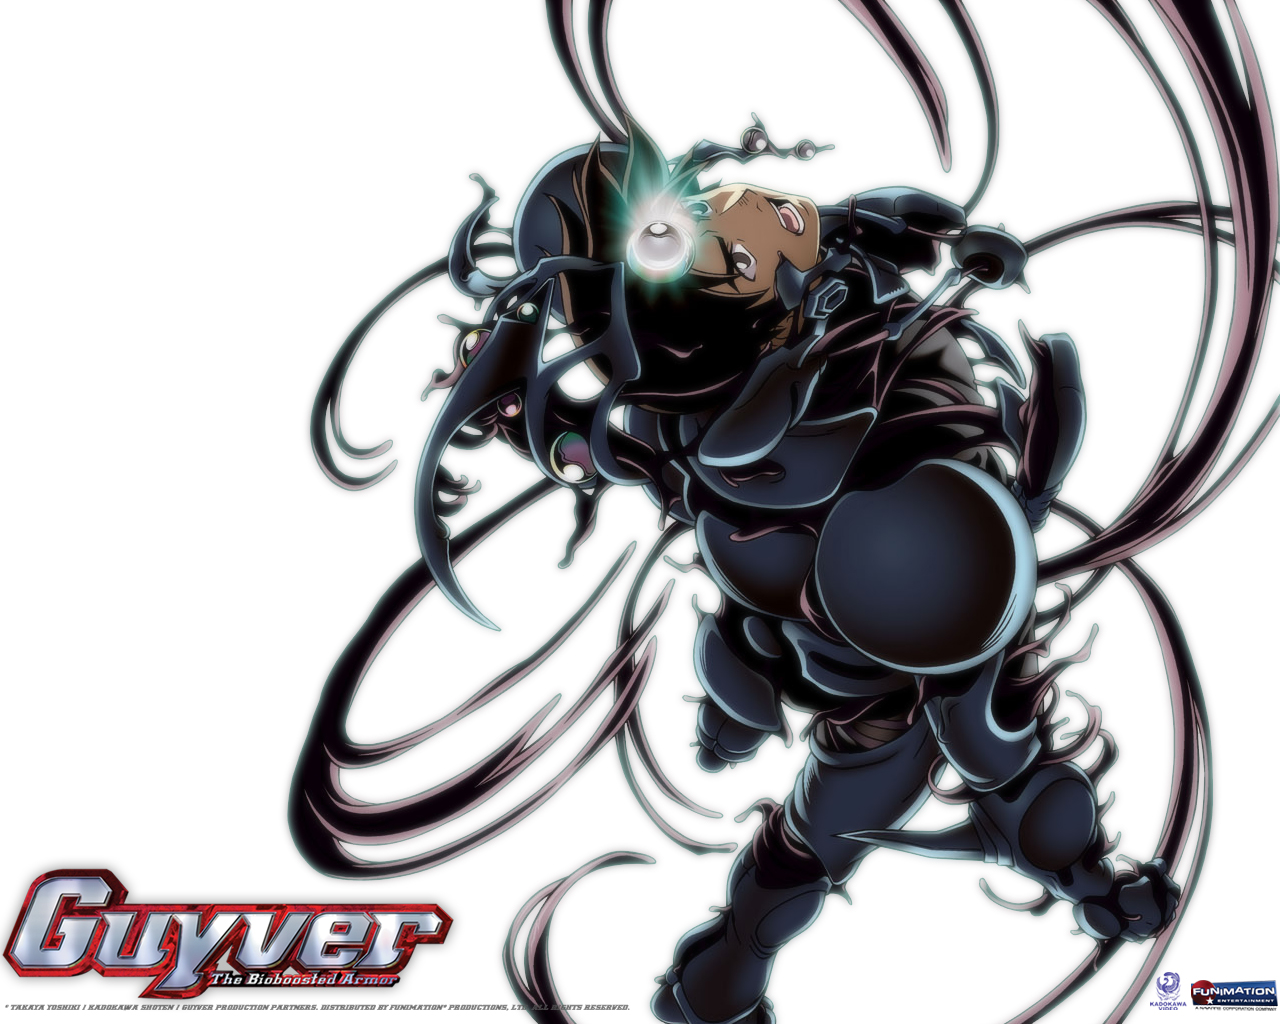 Download guyver the bioboosted armor s for ile phone free guyver the bioboosted armor hd pictures